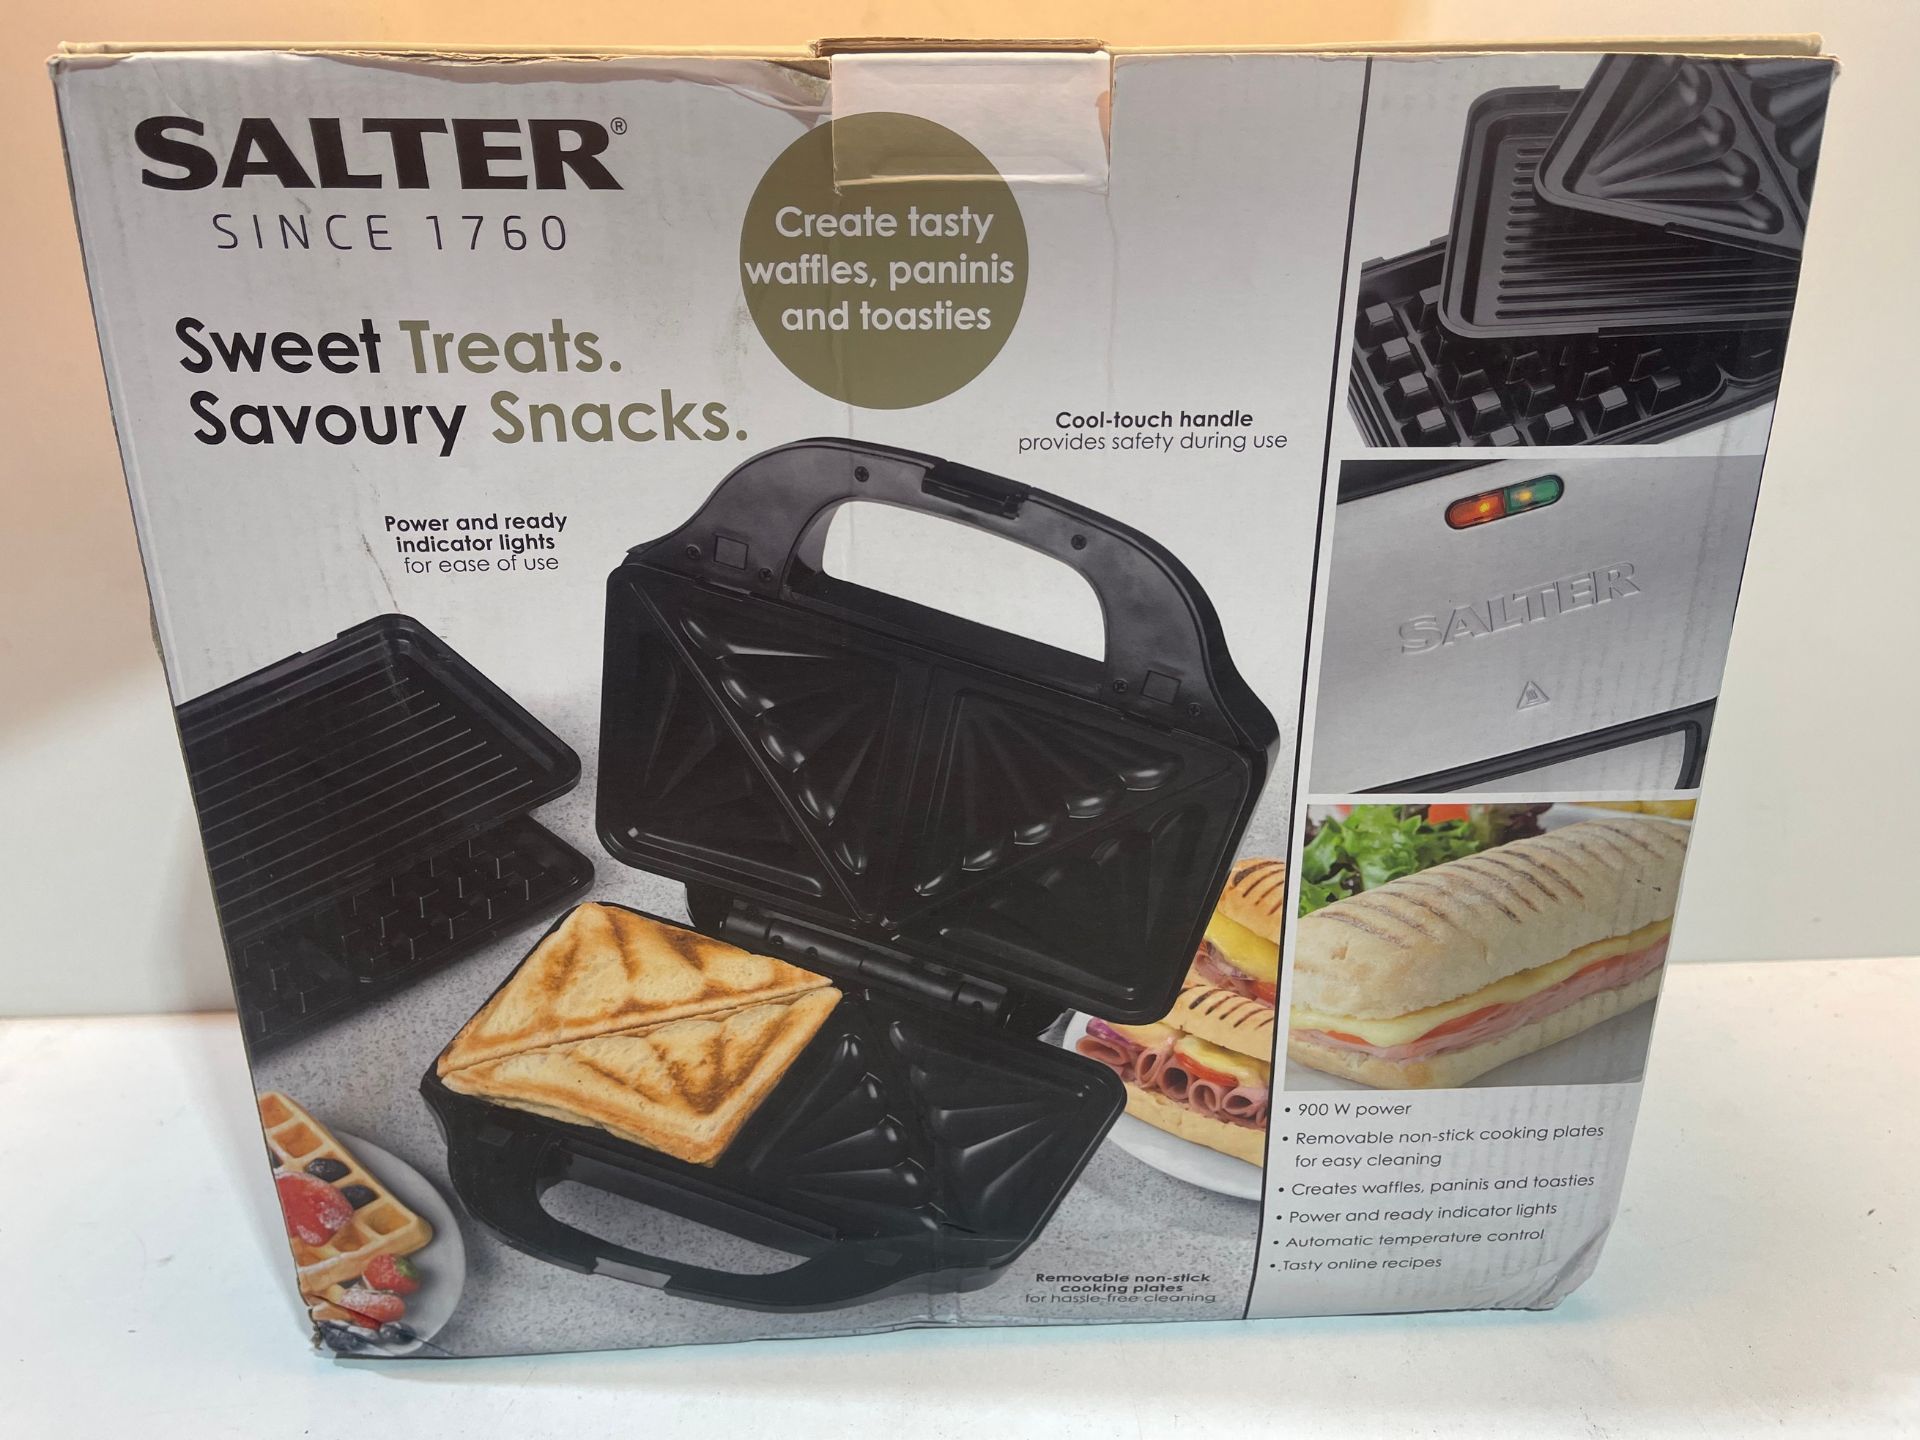 Salter EK2143 Deep Fill 3-in-1 Snack Maker with Interchangeable Waffle, Panini and Toasted Sandwich, - Image 2 of 2